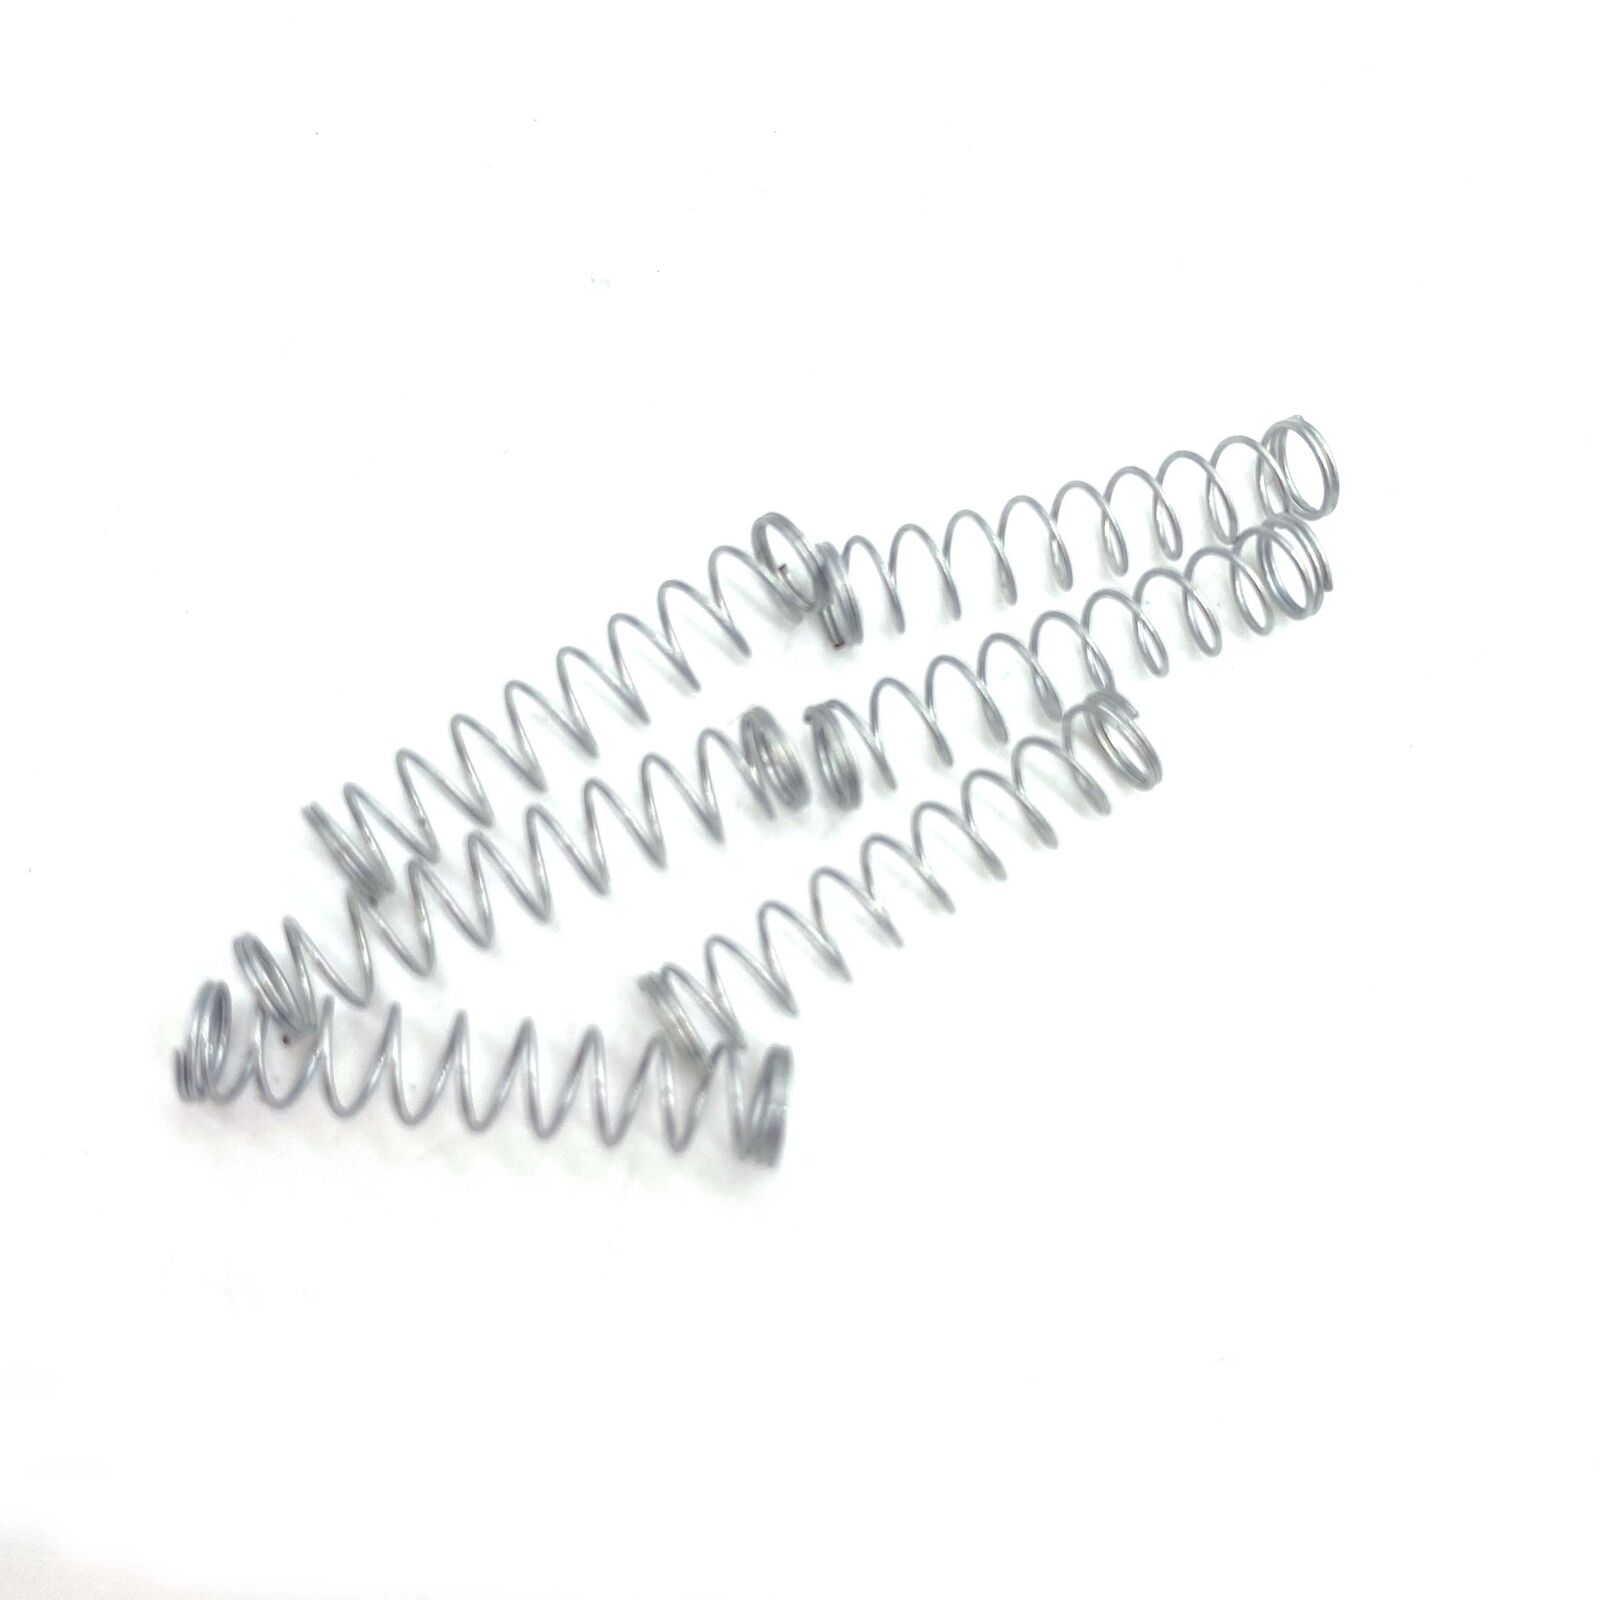 1set/100pcs 25mm*7mm spring for pen refill fits made by spring steel